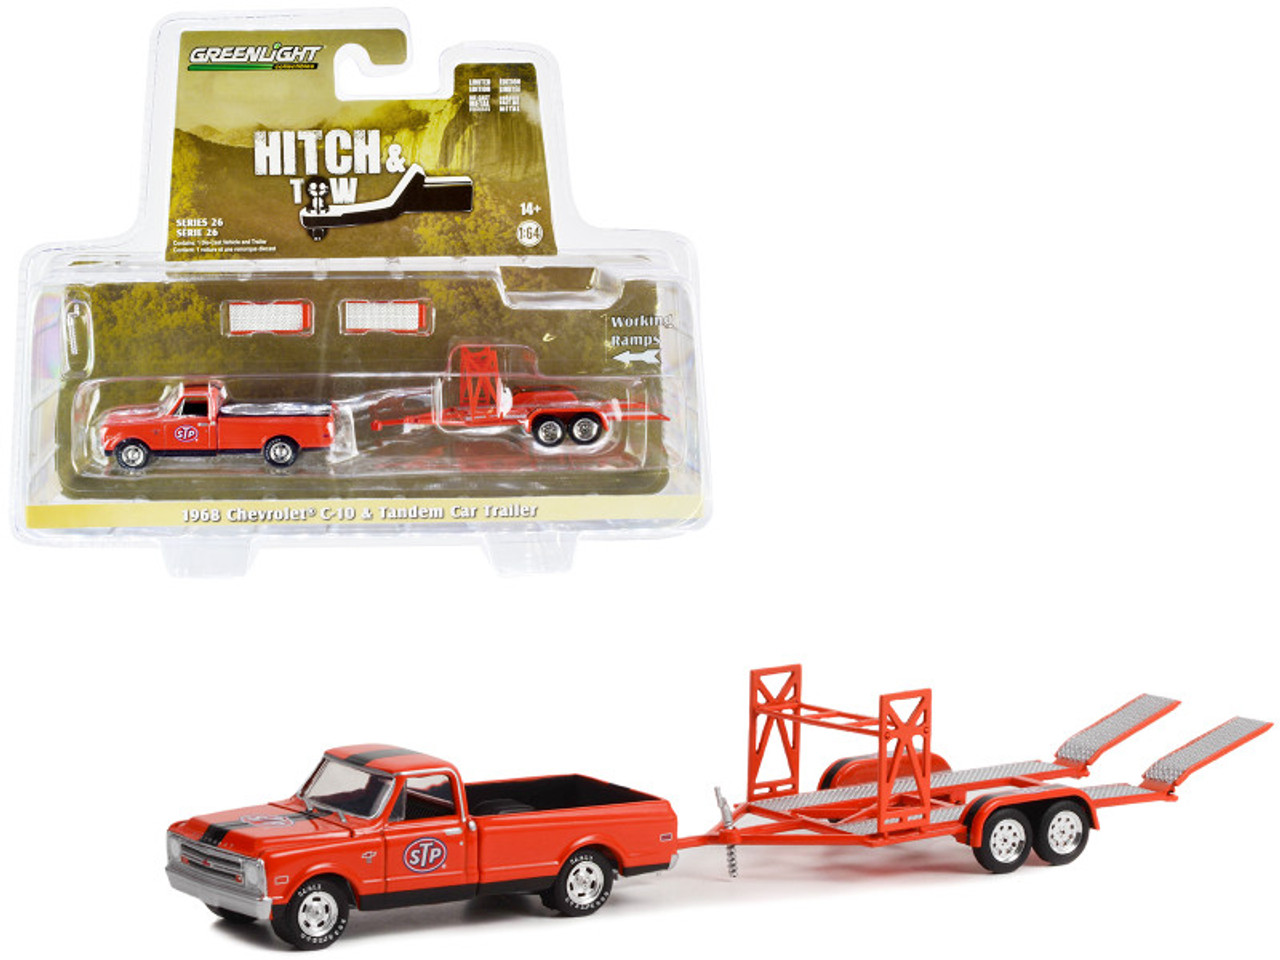 1968 Chevrolet C-10 Pickup Truck Orange with Black Stripes with Black Bed Cover and Tandem Car Trailer "STP" "Hitch & Tow" Series 26 1/64 Diecast Model Car by Greenlight